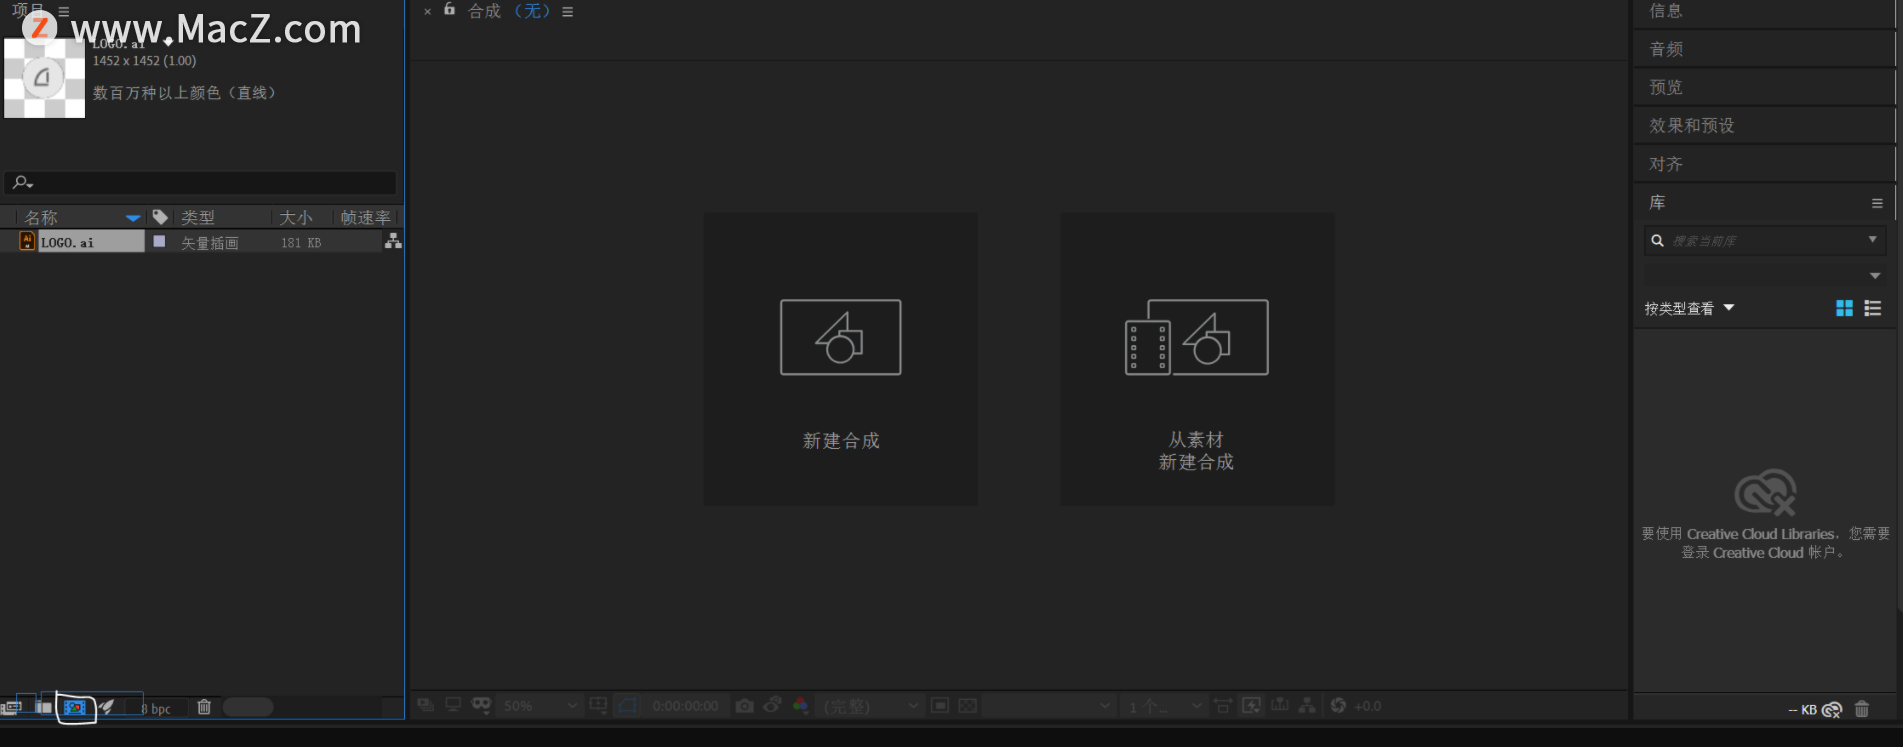 Ae教程：快速入门Adobe After Effects